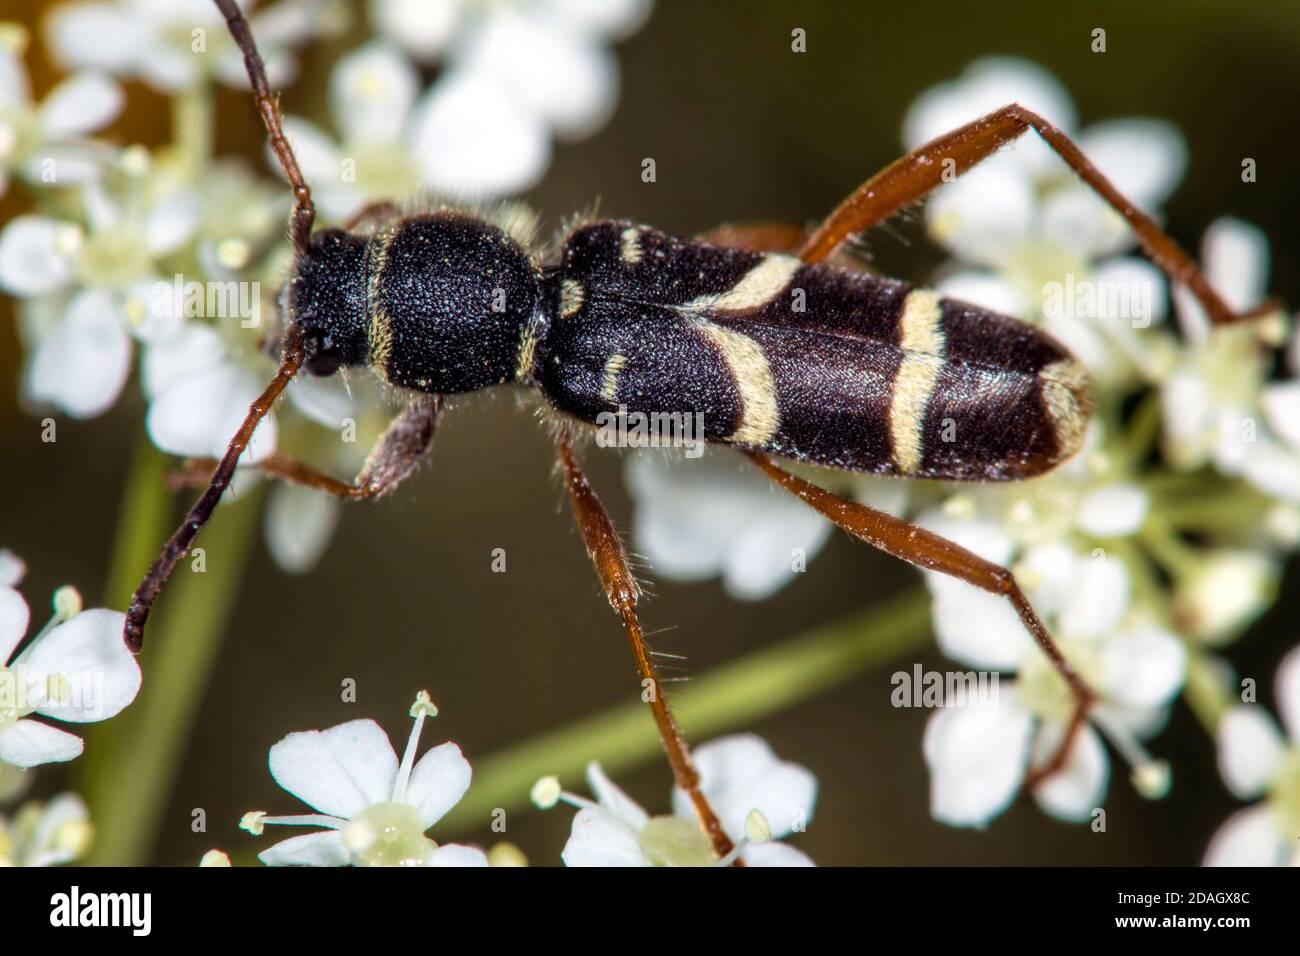 wasp beetle (Clytus arietis), on an inflorescense, Germany Stock Photo